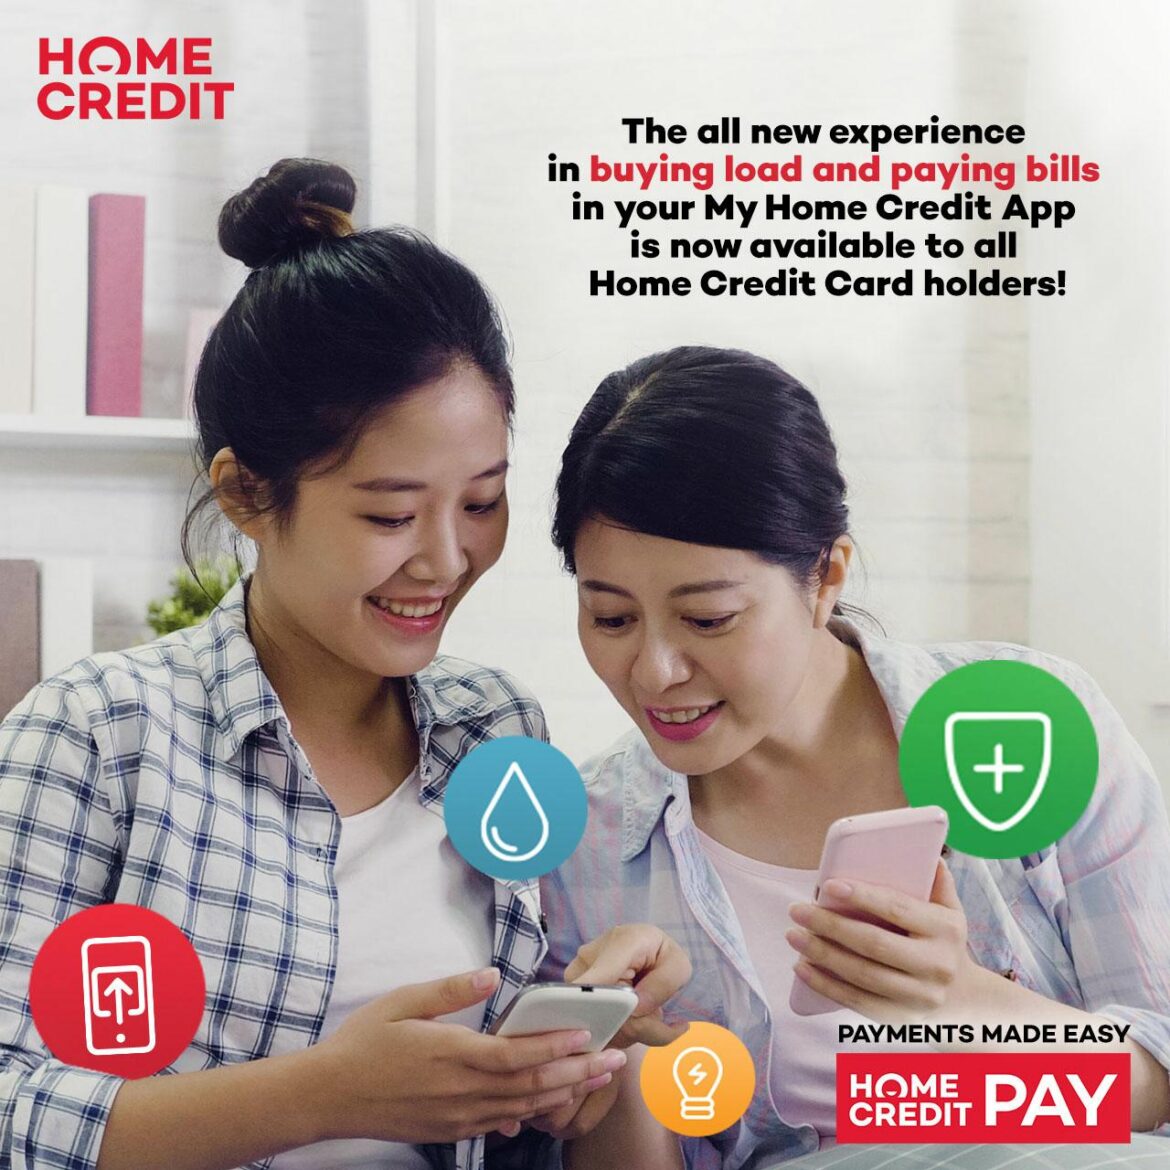 Pay Bills, Buy Load, and More with My Home Credit App